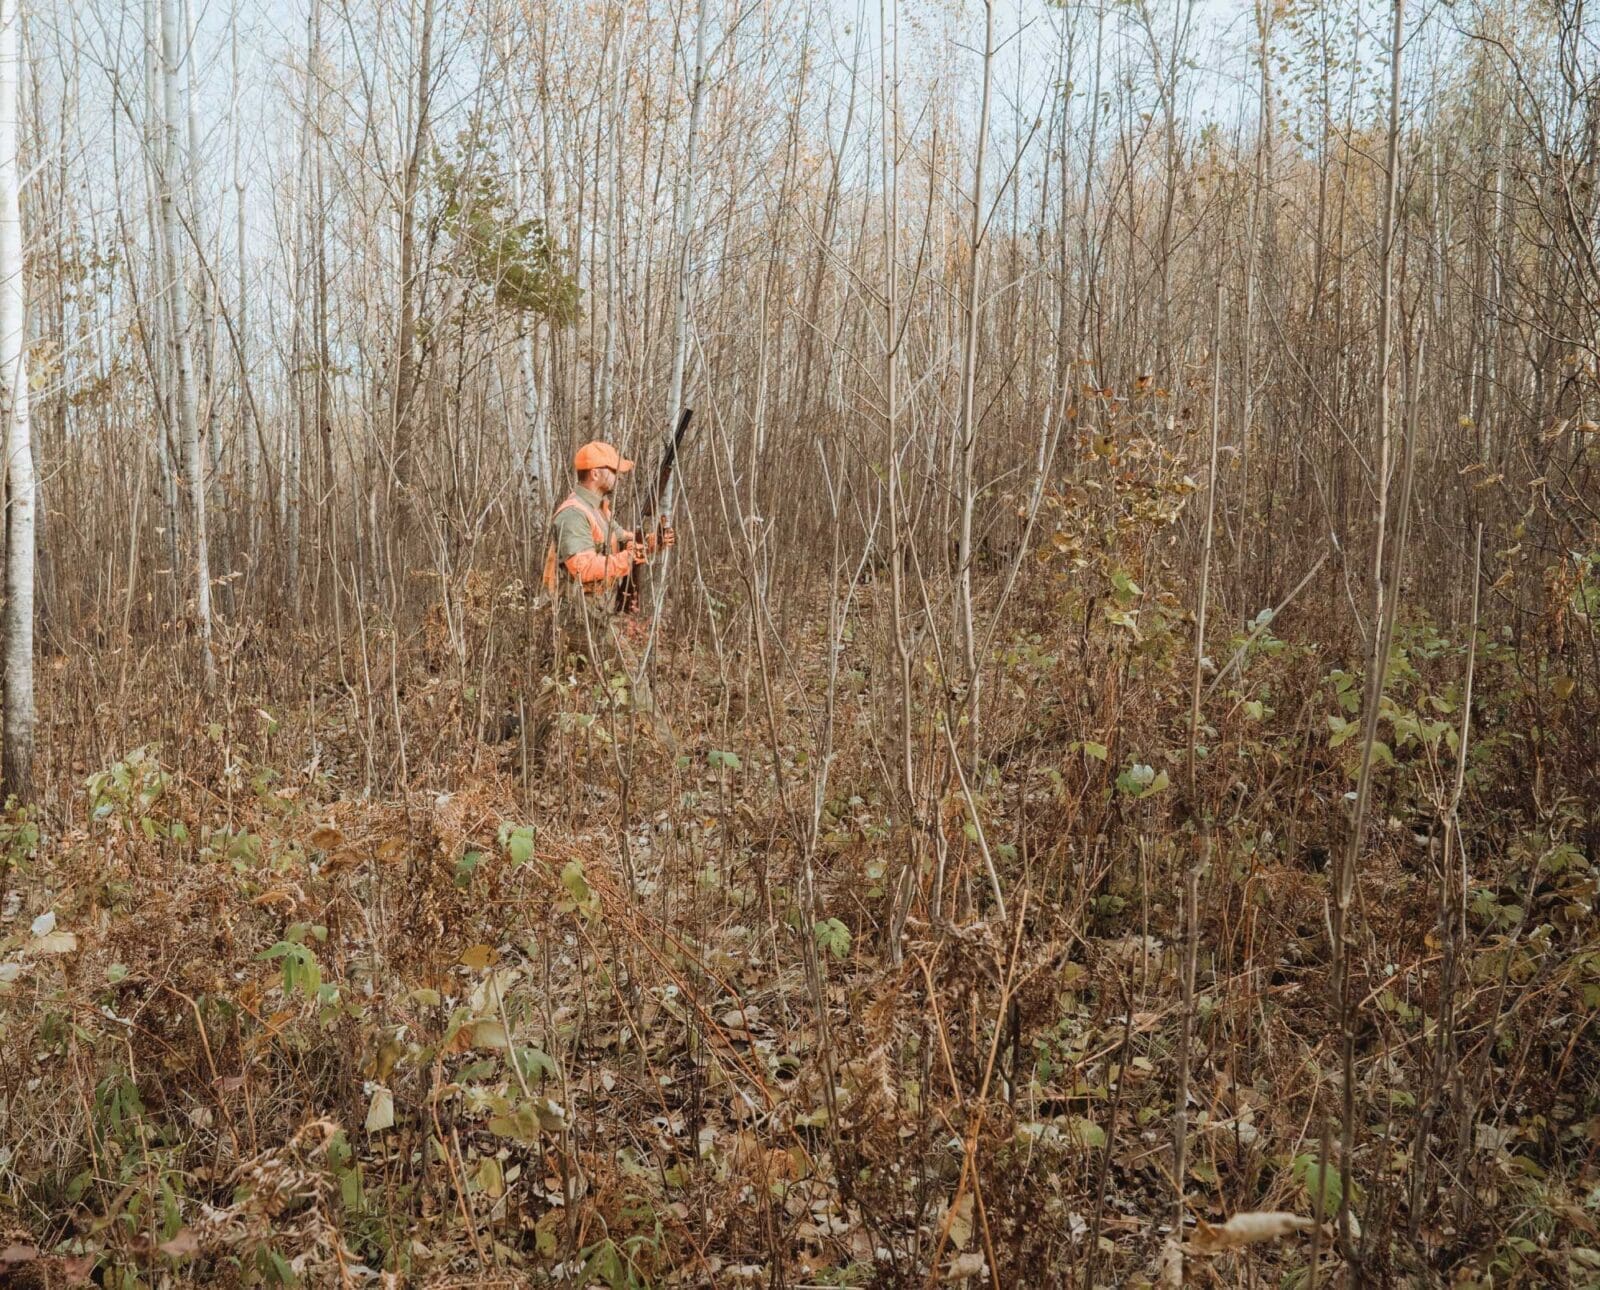 A bird hunter walking in the Wisconsin forest.